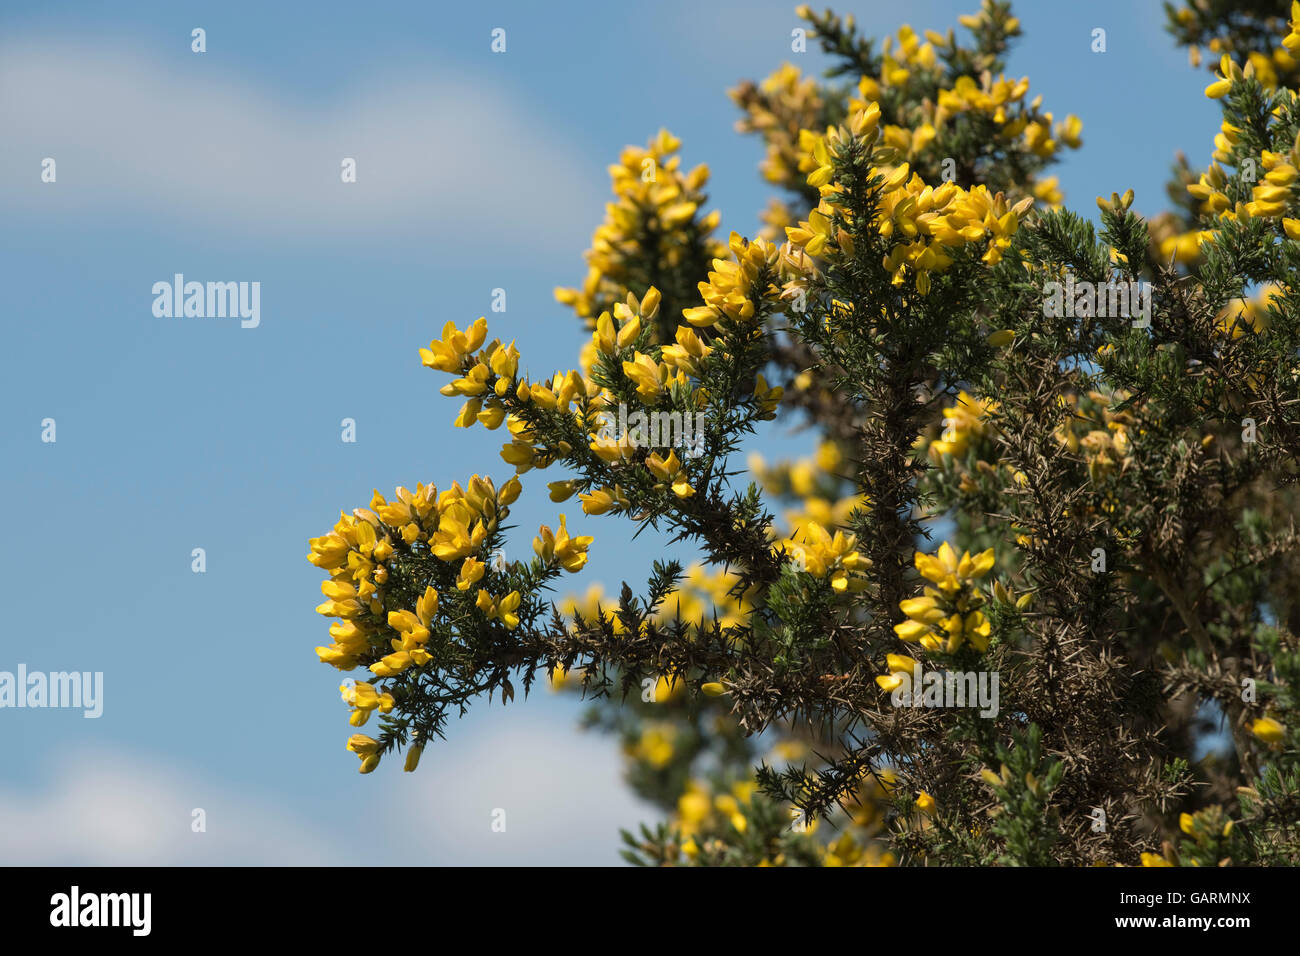 Yellow flowers of a gorse or furze bush, Ulex europaeus, against a blue sky in spring, May Stock Photo